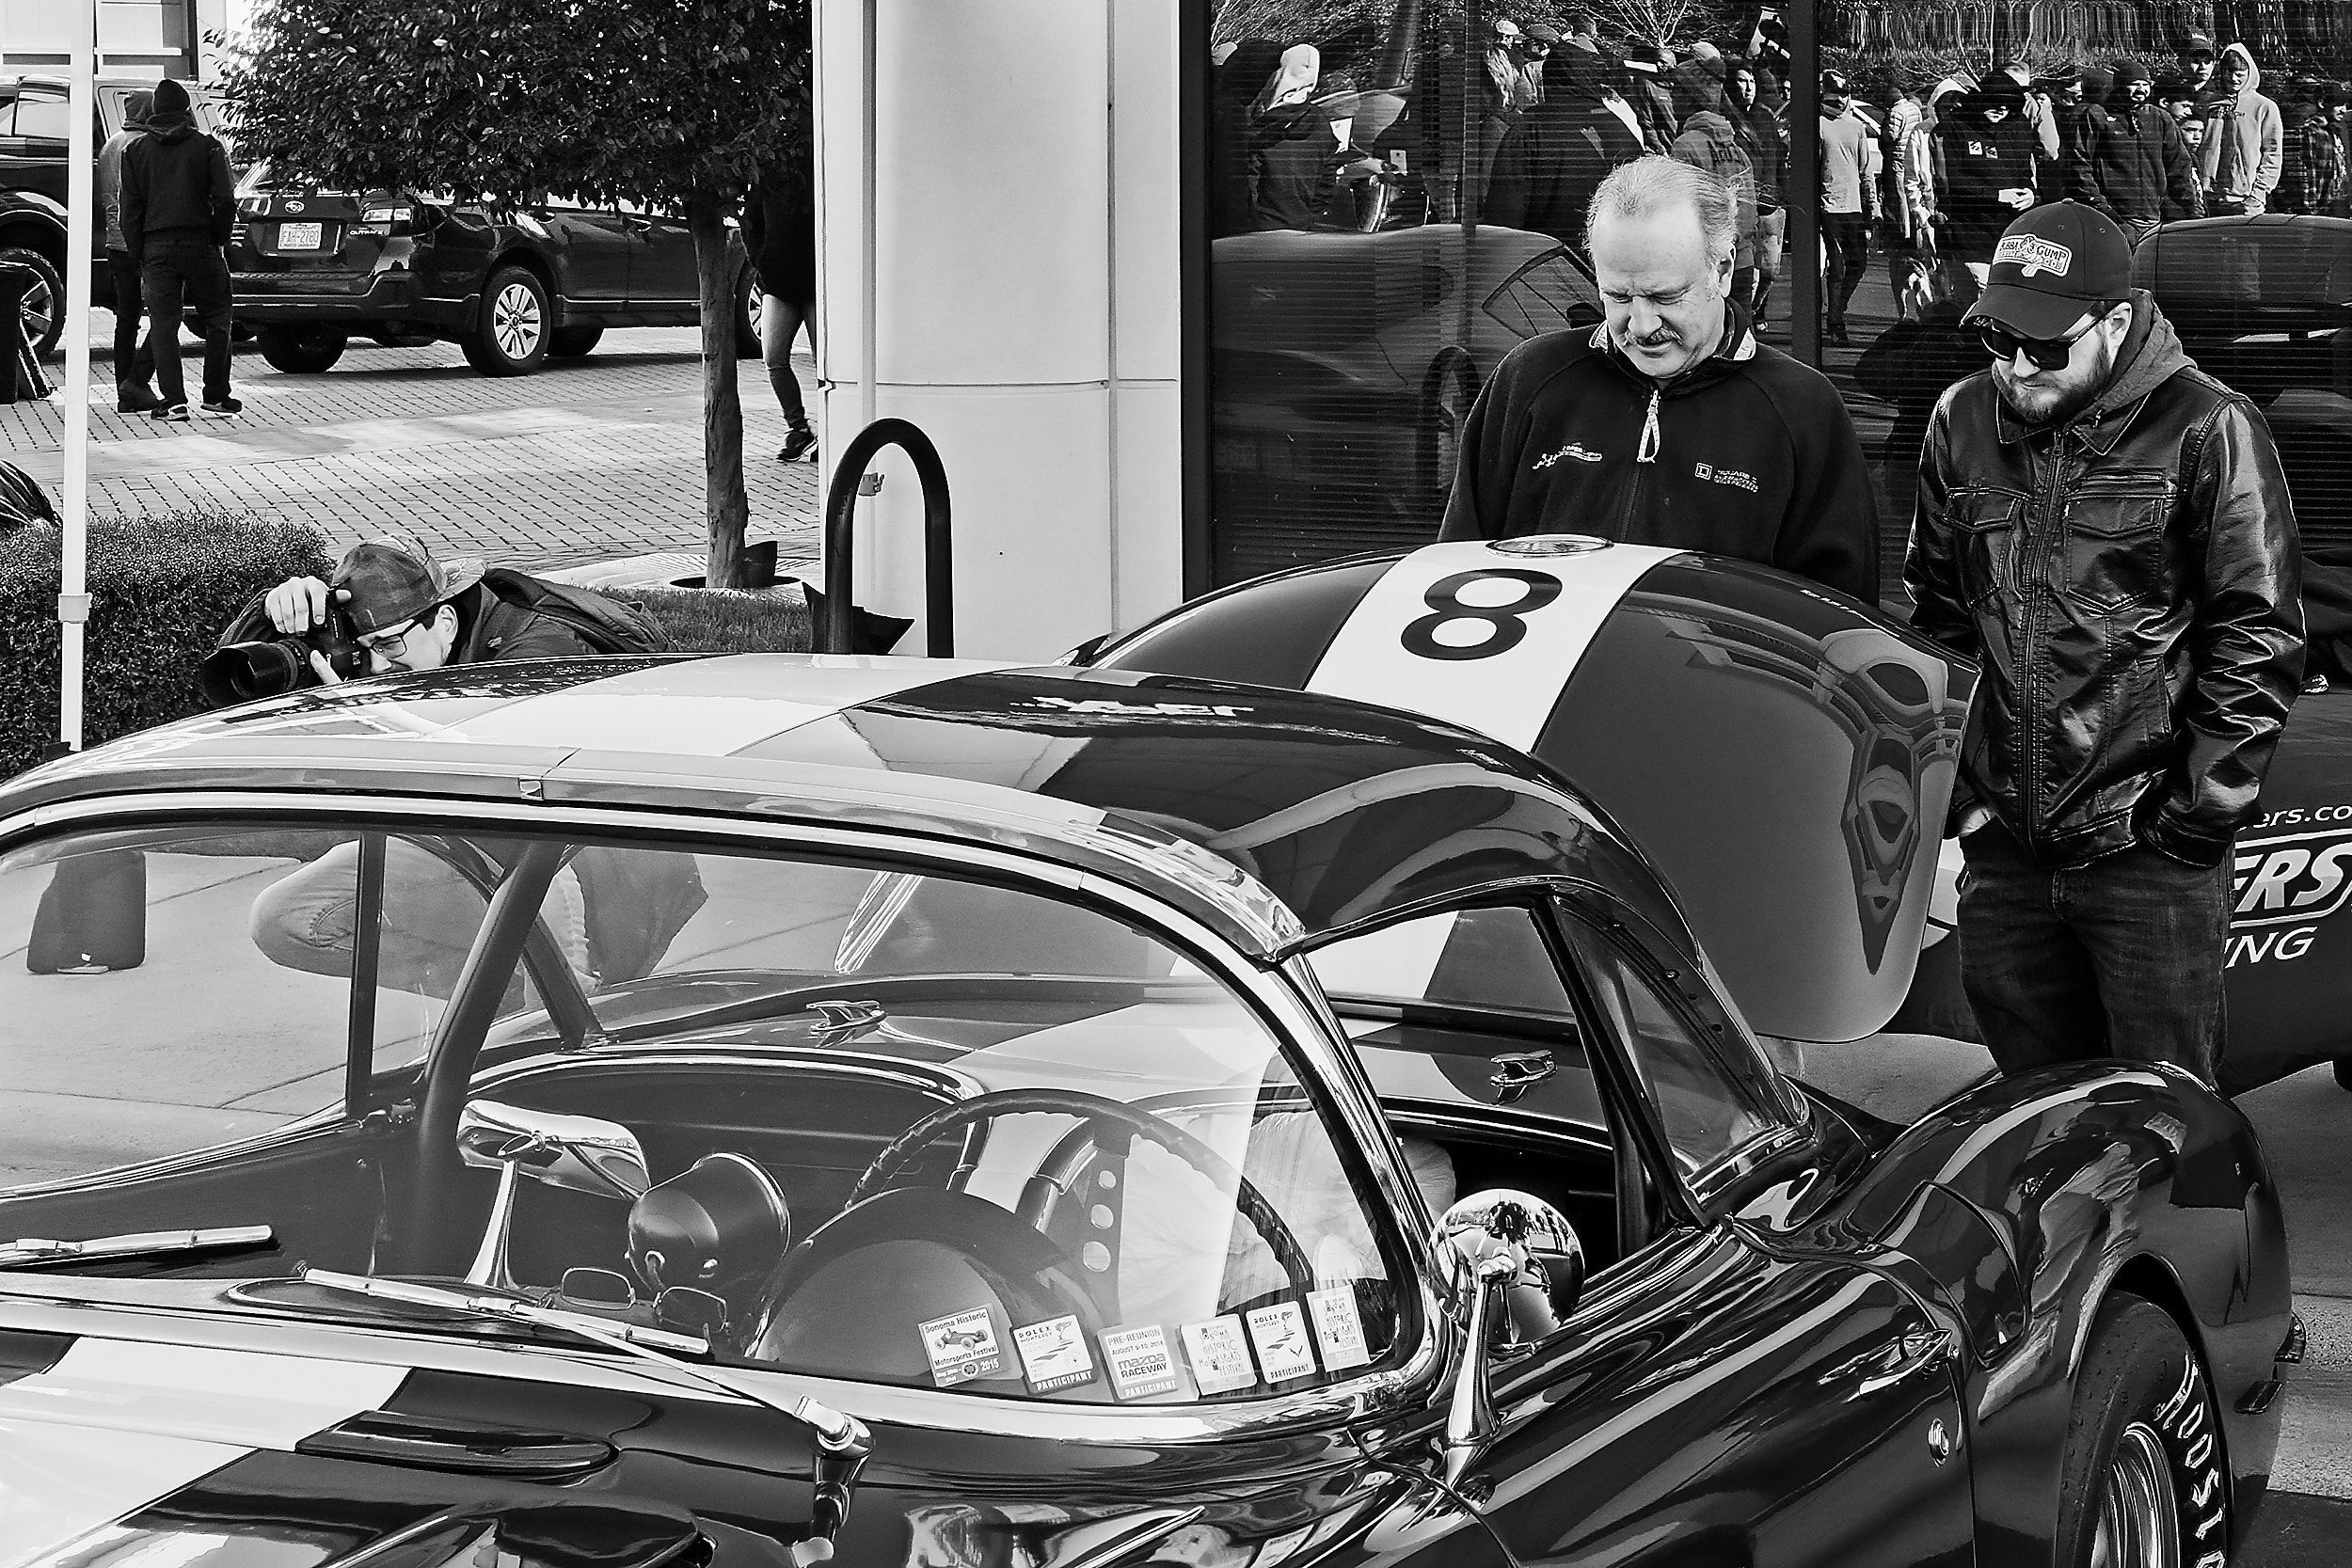  image from a car show in Charlotte, NC - two men looking into the trunk of a vintage Corvette 